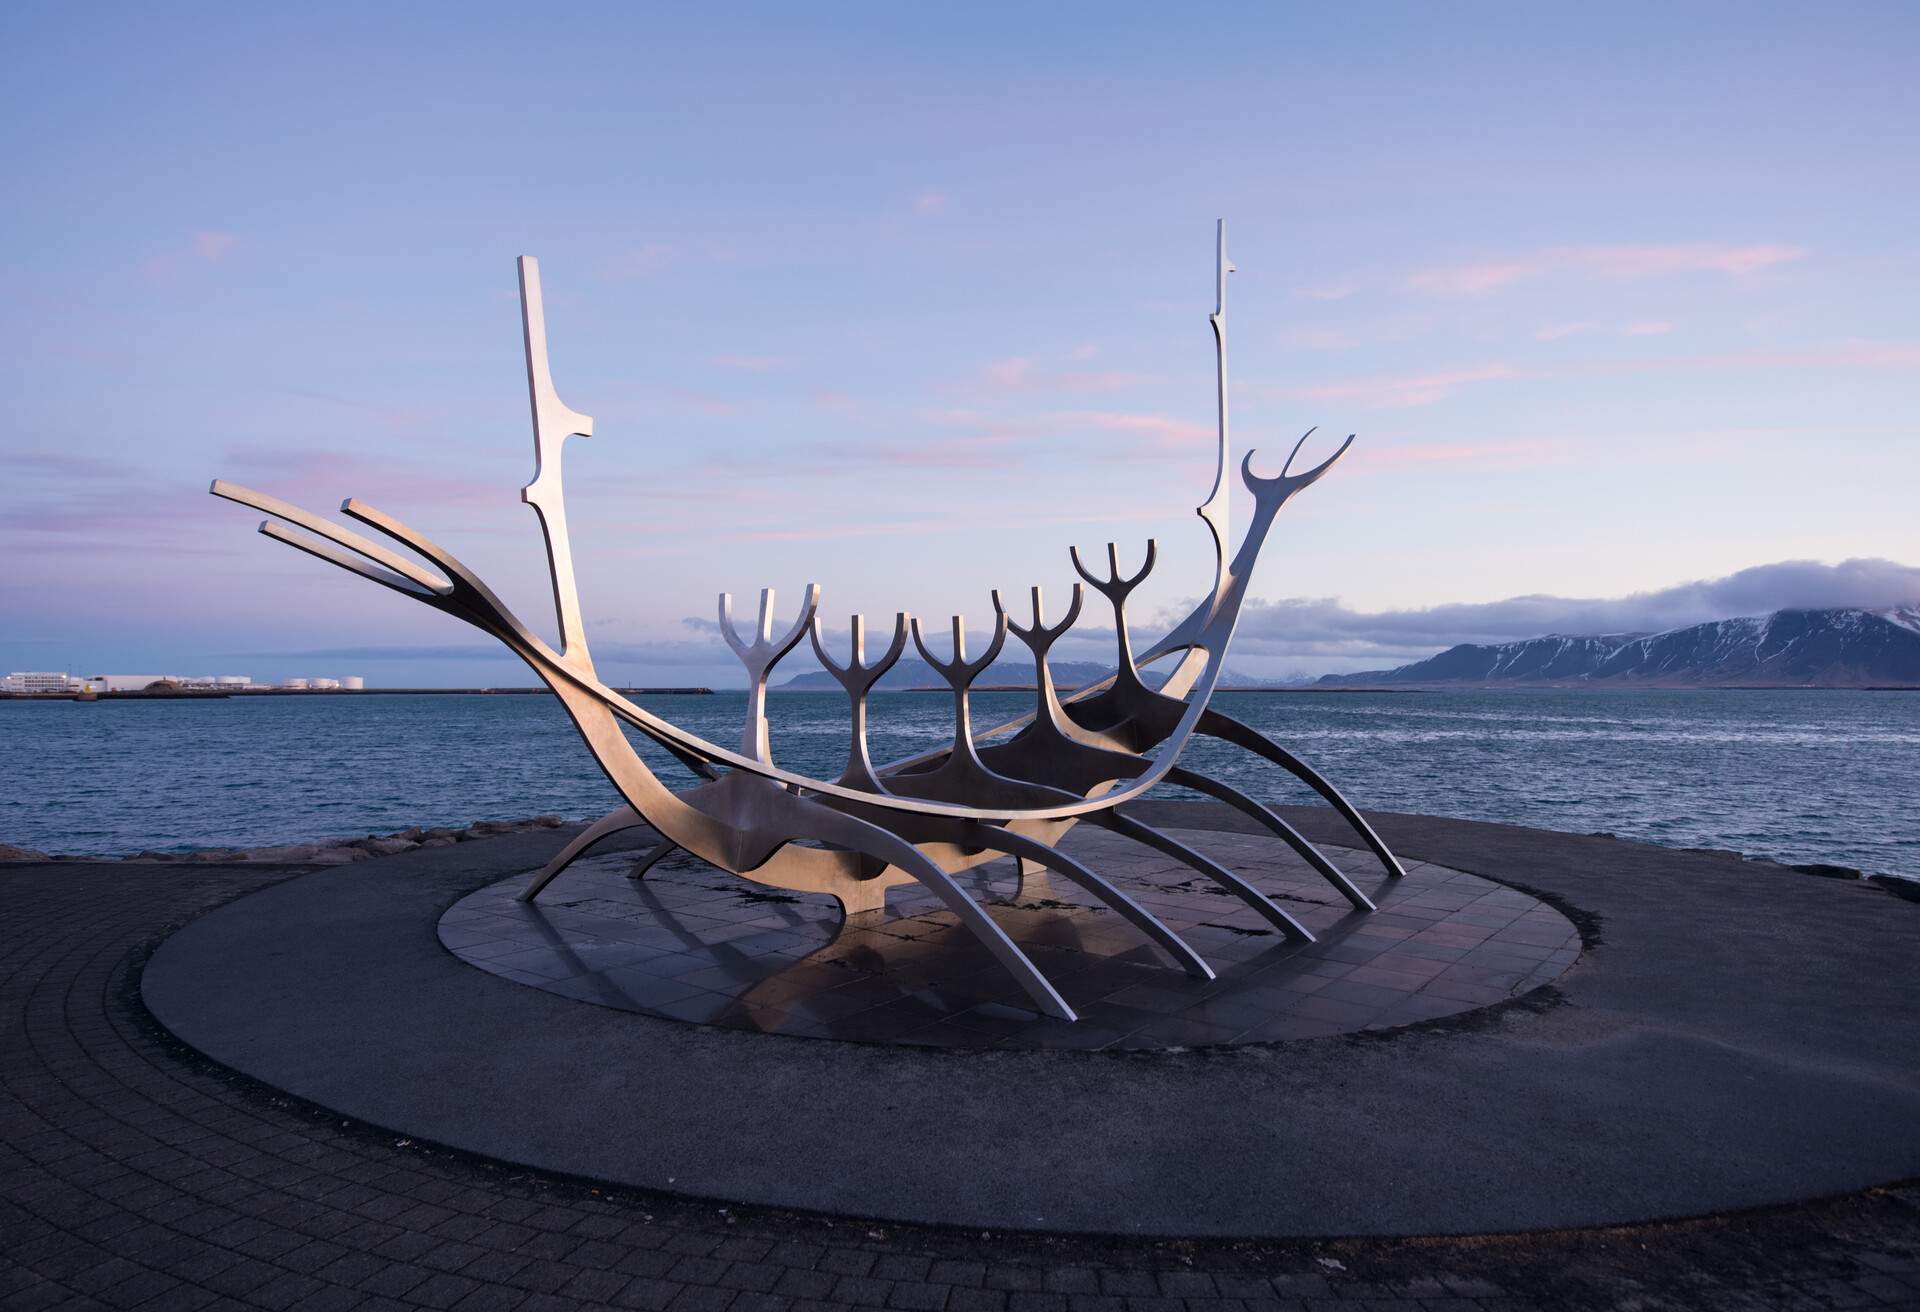 the monument at reykjavik bay have the fog on the mountain at background